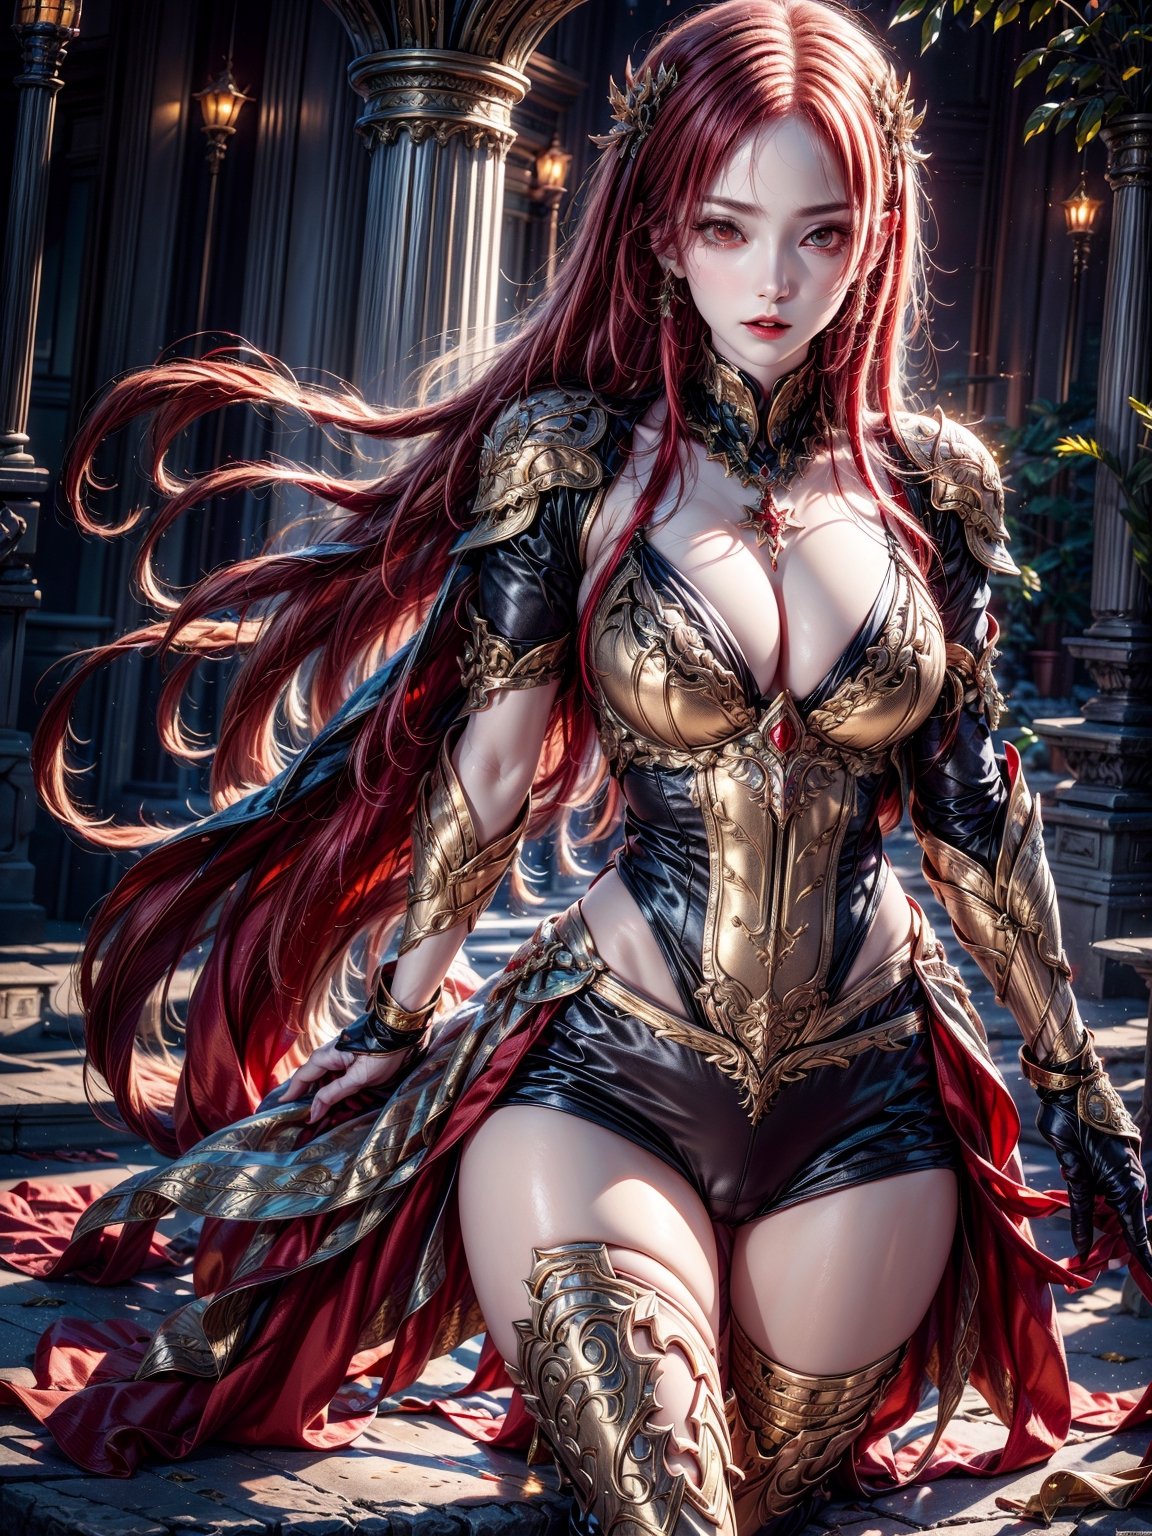 A female vampire with fiery red hair and snow-white skin is dressed in a full-body suit of opulent gold and red armor, which is highly intricate, noble, and combines elements of both ancient and mechanical styles. The scene is illuminated by bright lighting and captured in stunning 8K resolution.